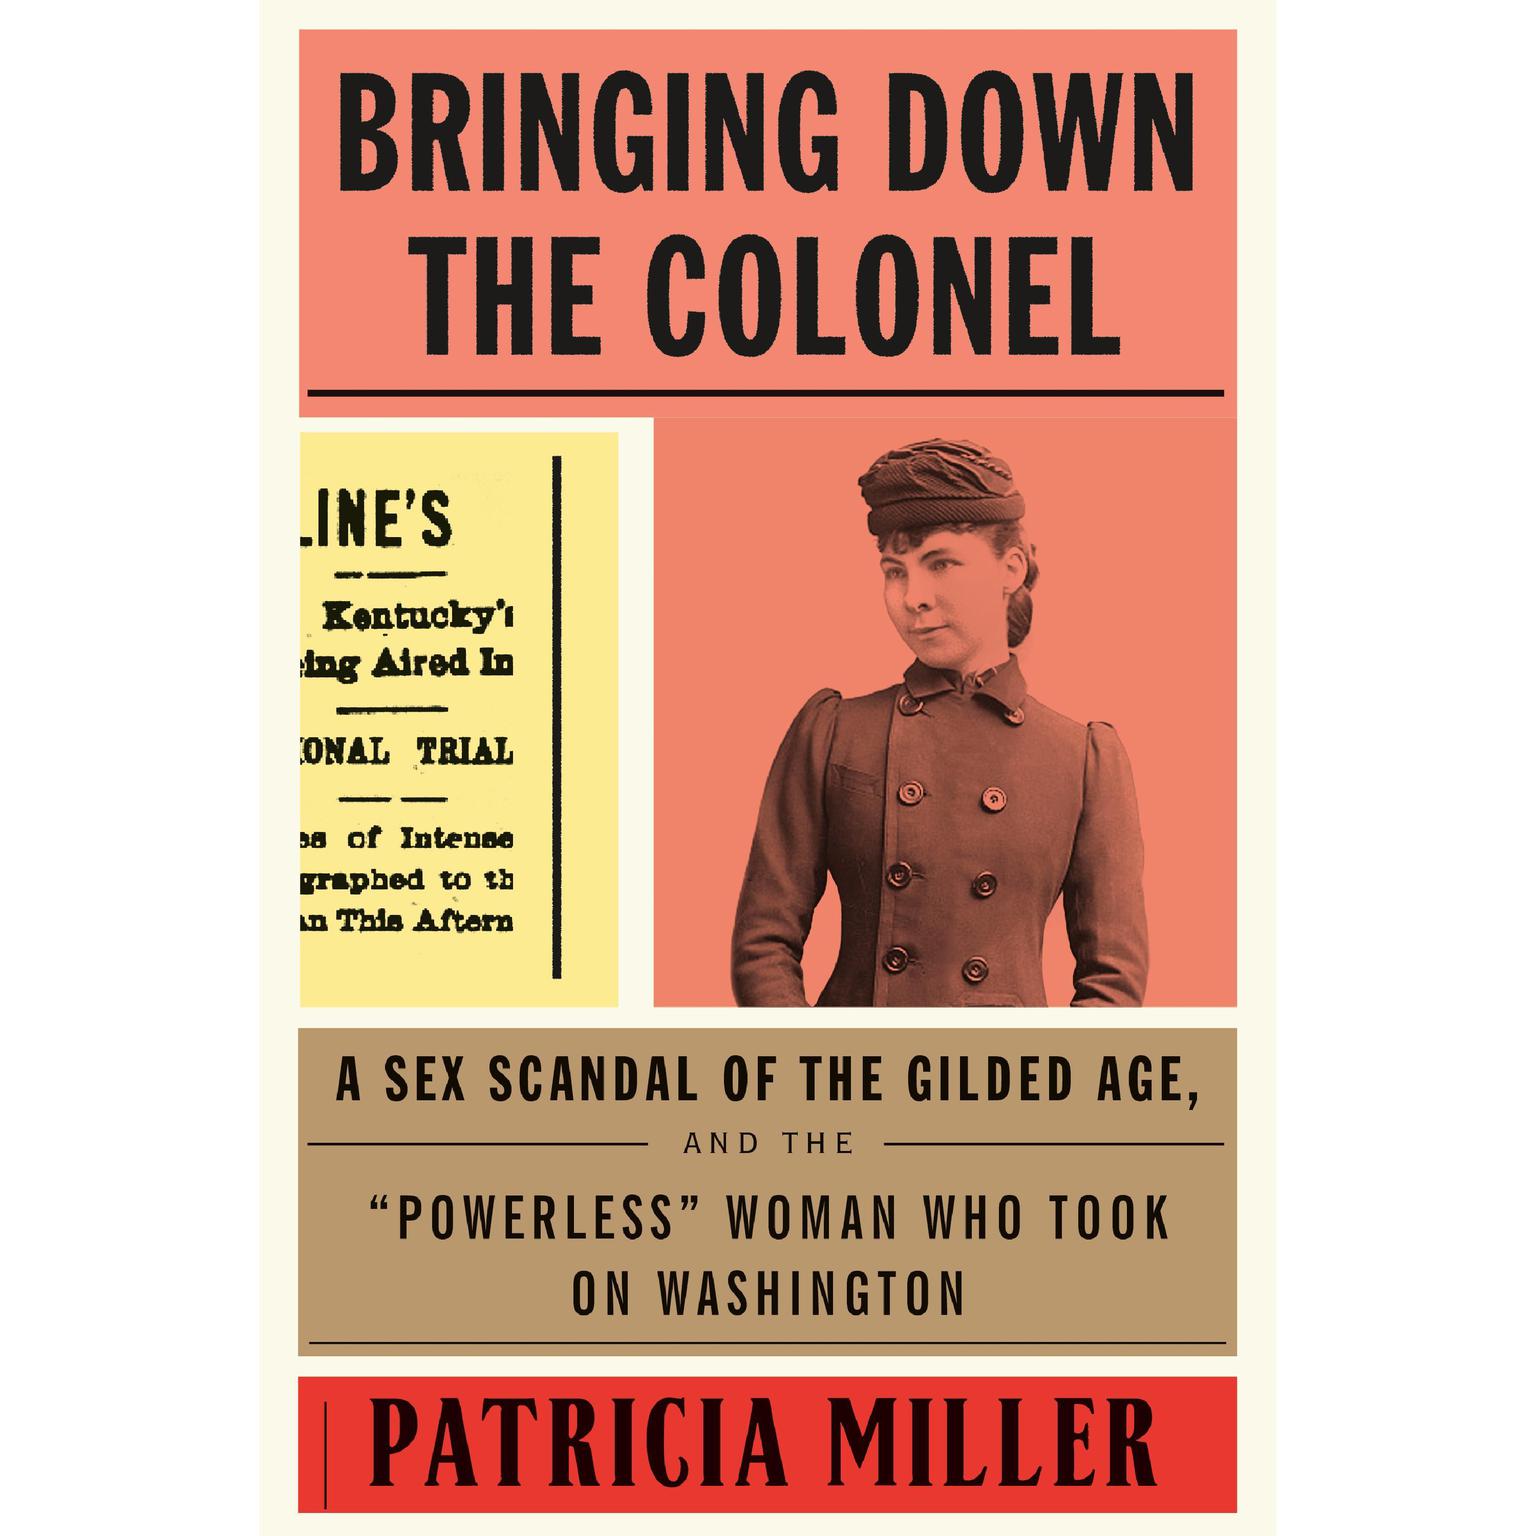 Bringing Down the Colonel: A Sex Scandal of the Gilded Age, and the Powerless Woman Who Took On Washington Audiobook, by Patricia Miller